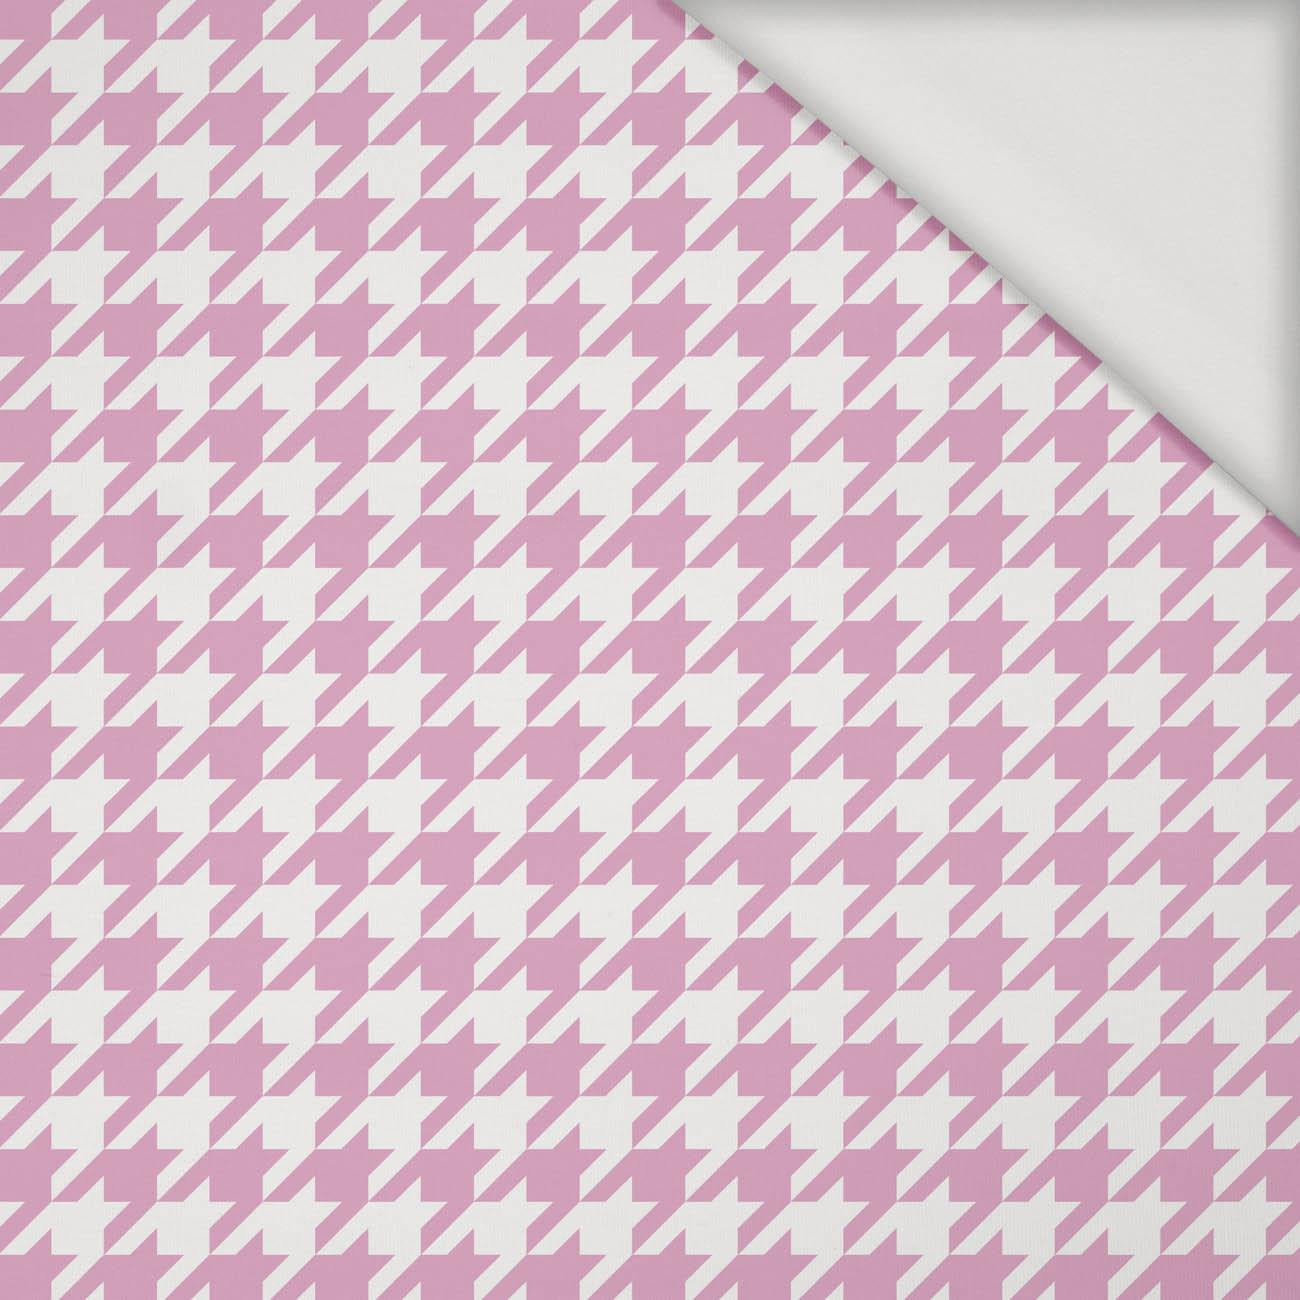 PINK HOUNDSTOOTH / WHITE - Viscose jersey